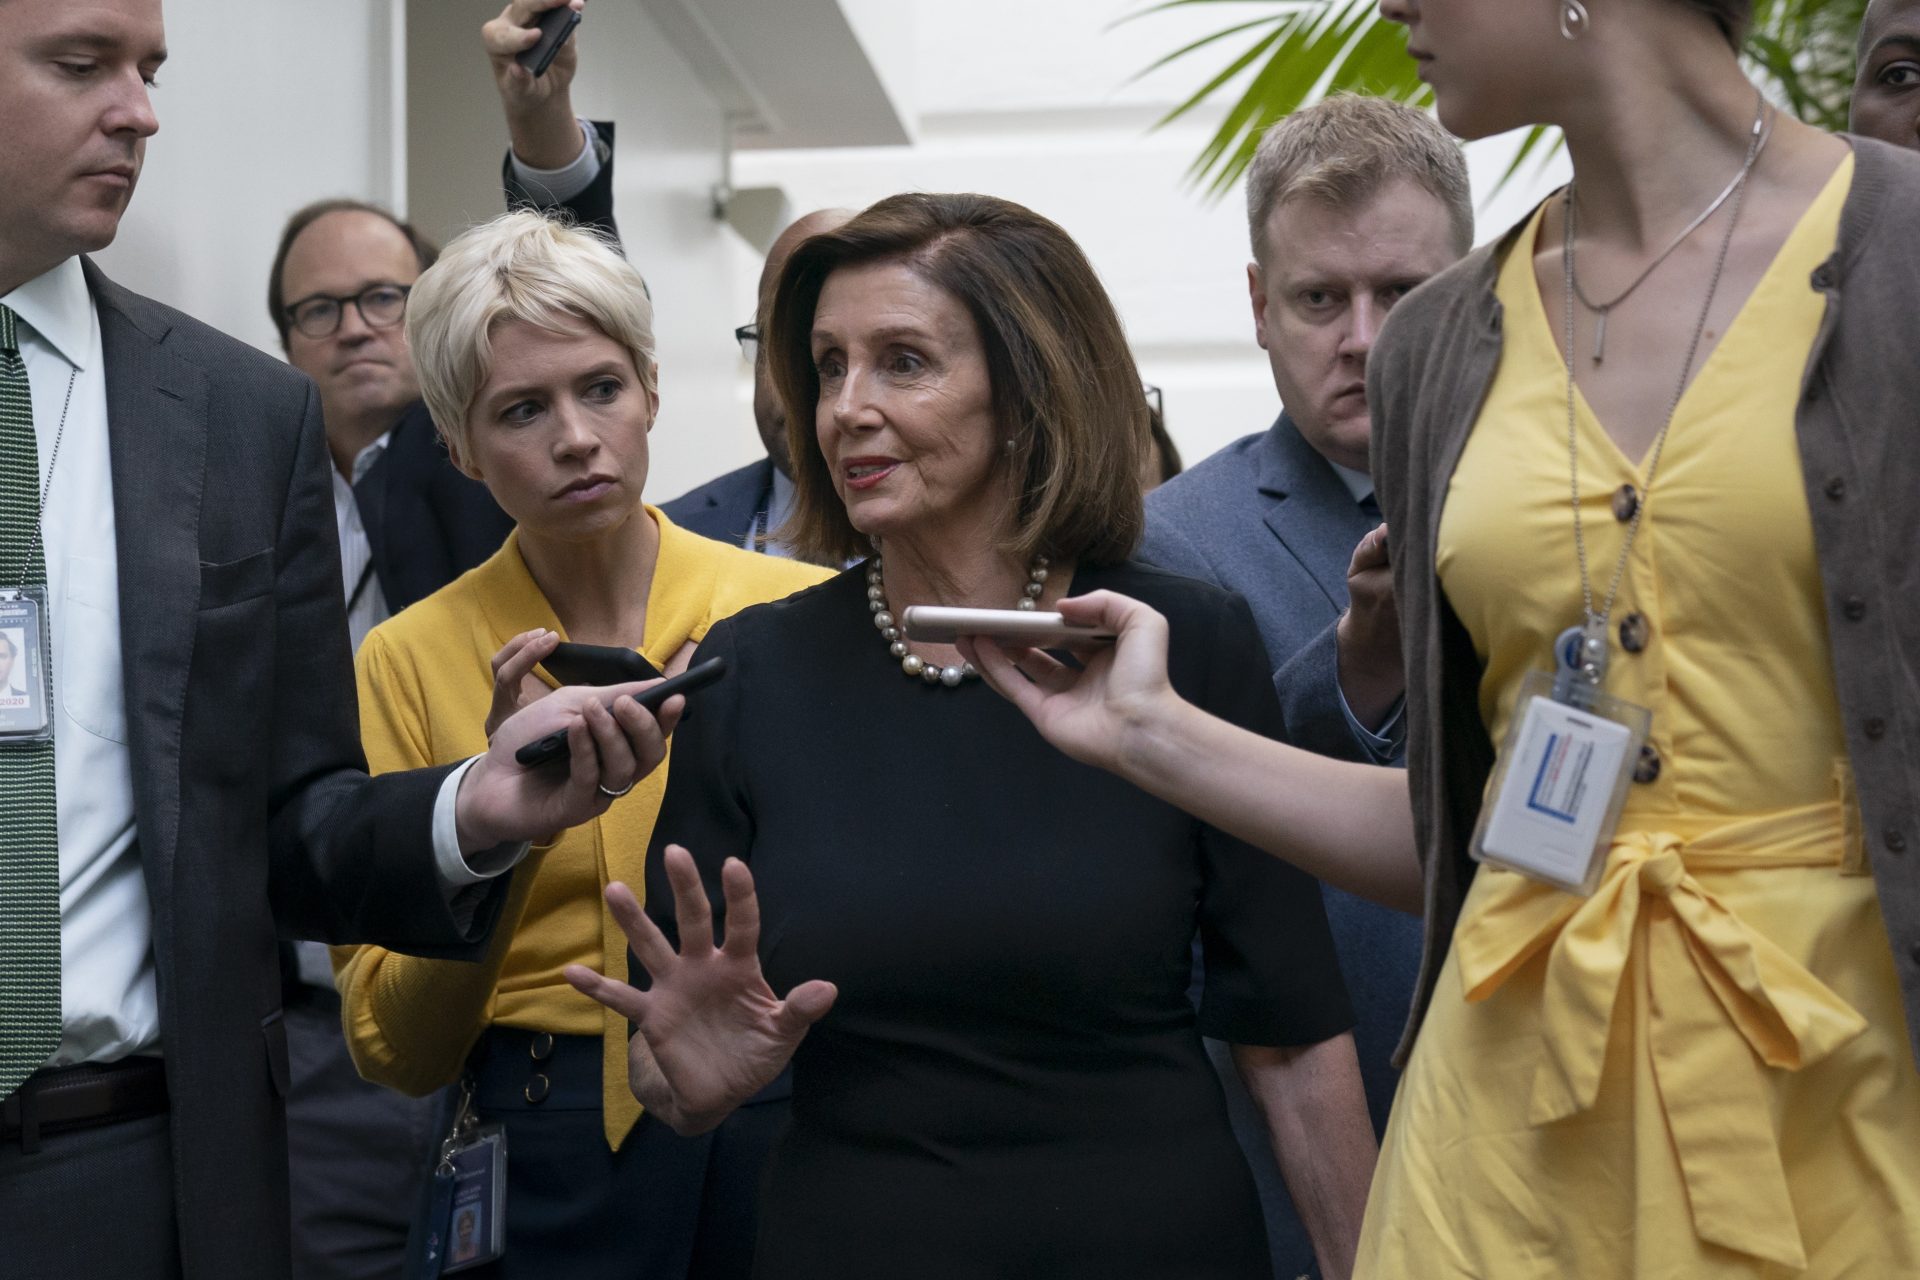 Speaker of the House Nancy Pelosi, D-Calif., is surrounded by reporters as she arrives to meet with her caucus the morning after declaring she will launch a formal impeachment inquiry against President Donald Trump, at the Capitol in Washington, Wednesday, Sept. 25, 2019